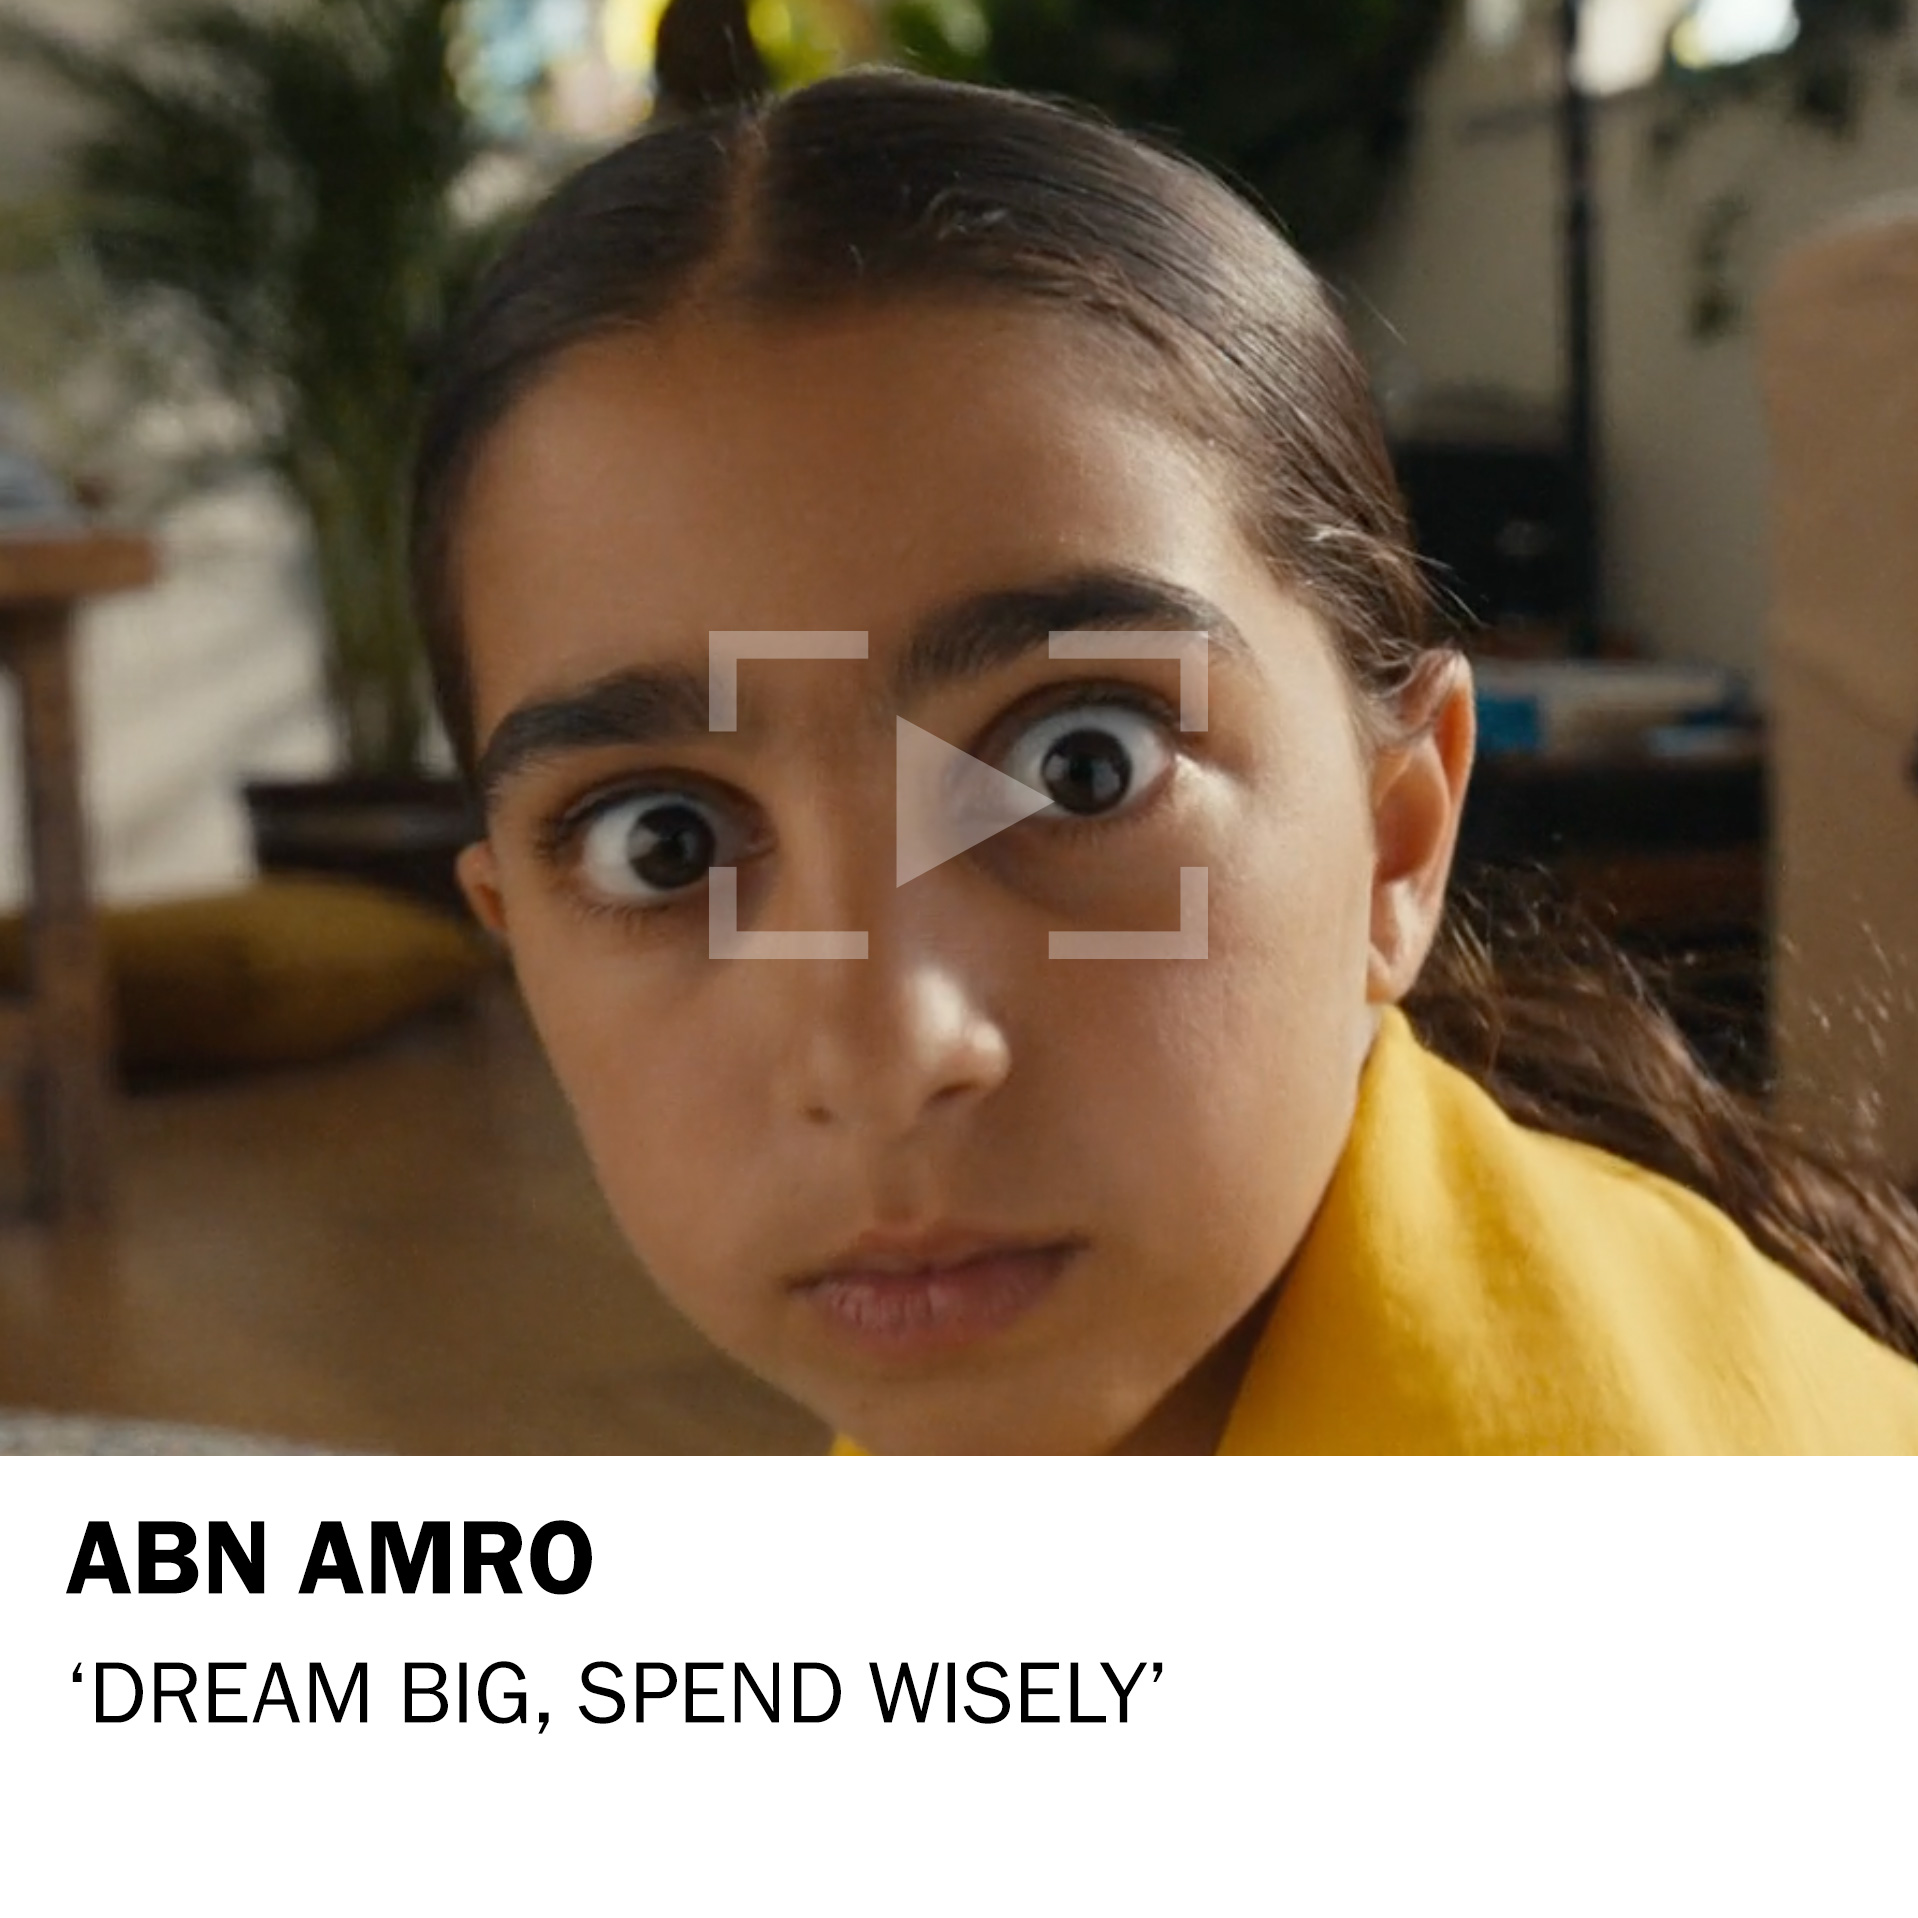 ABN AMRO – Dream big, spend wisely